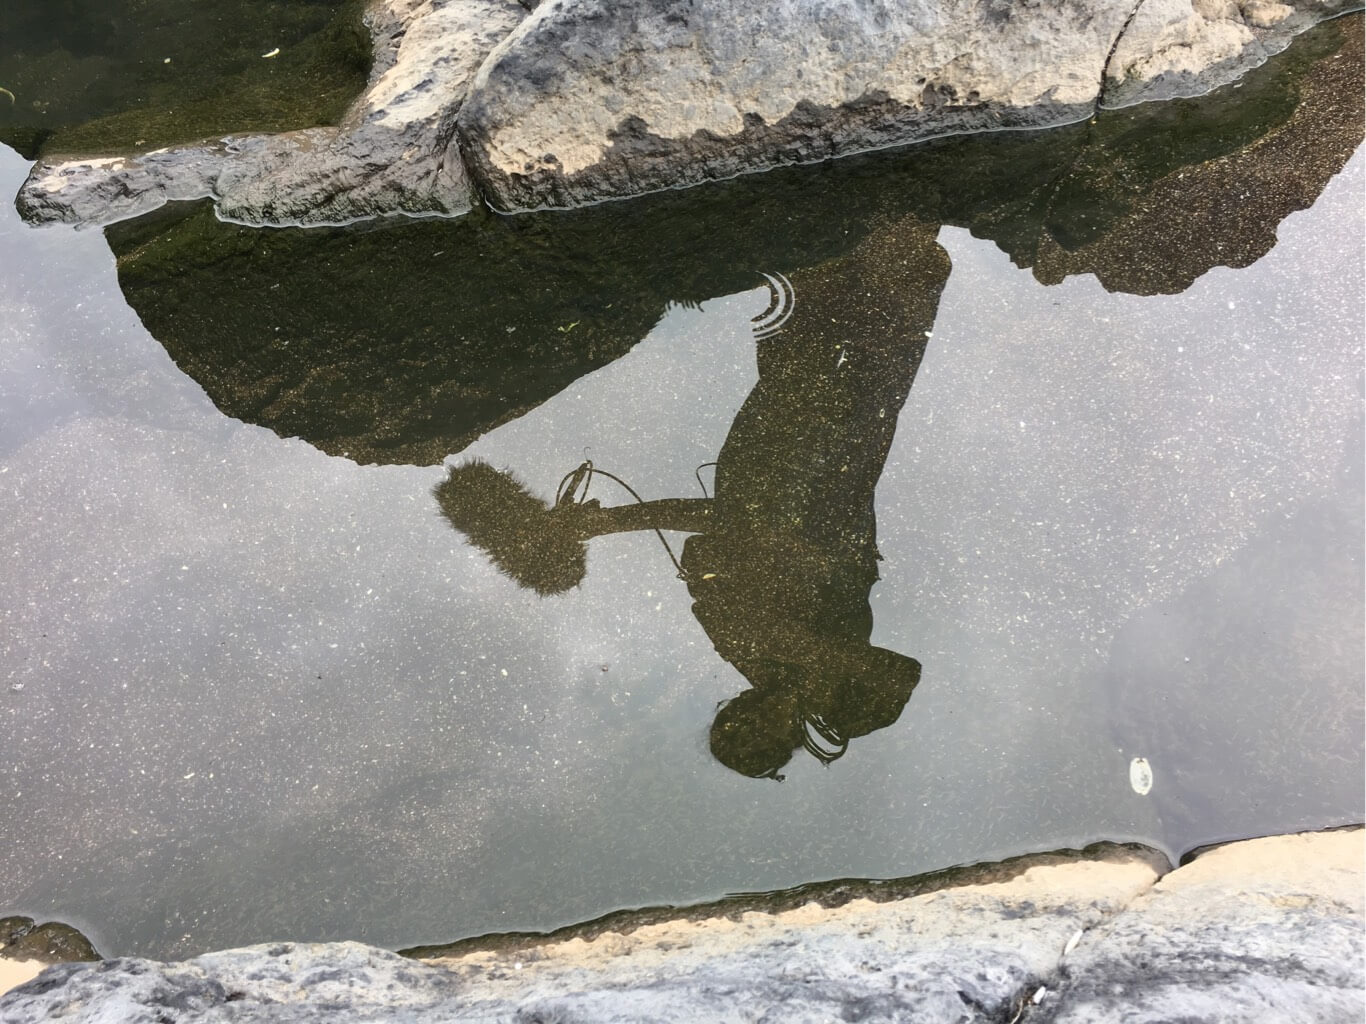 Location recording reflection in water